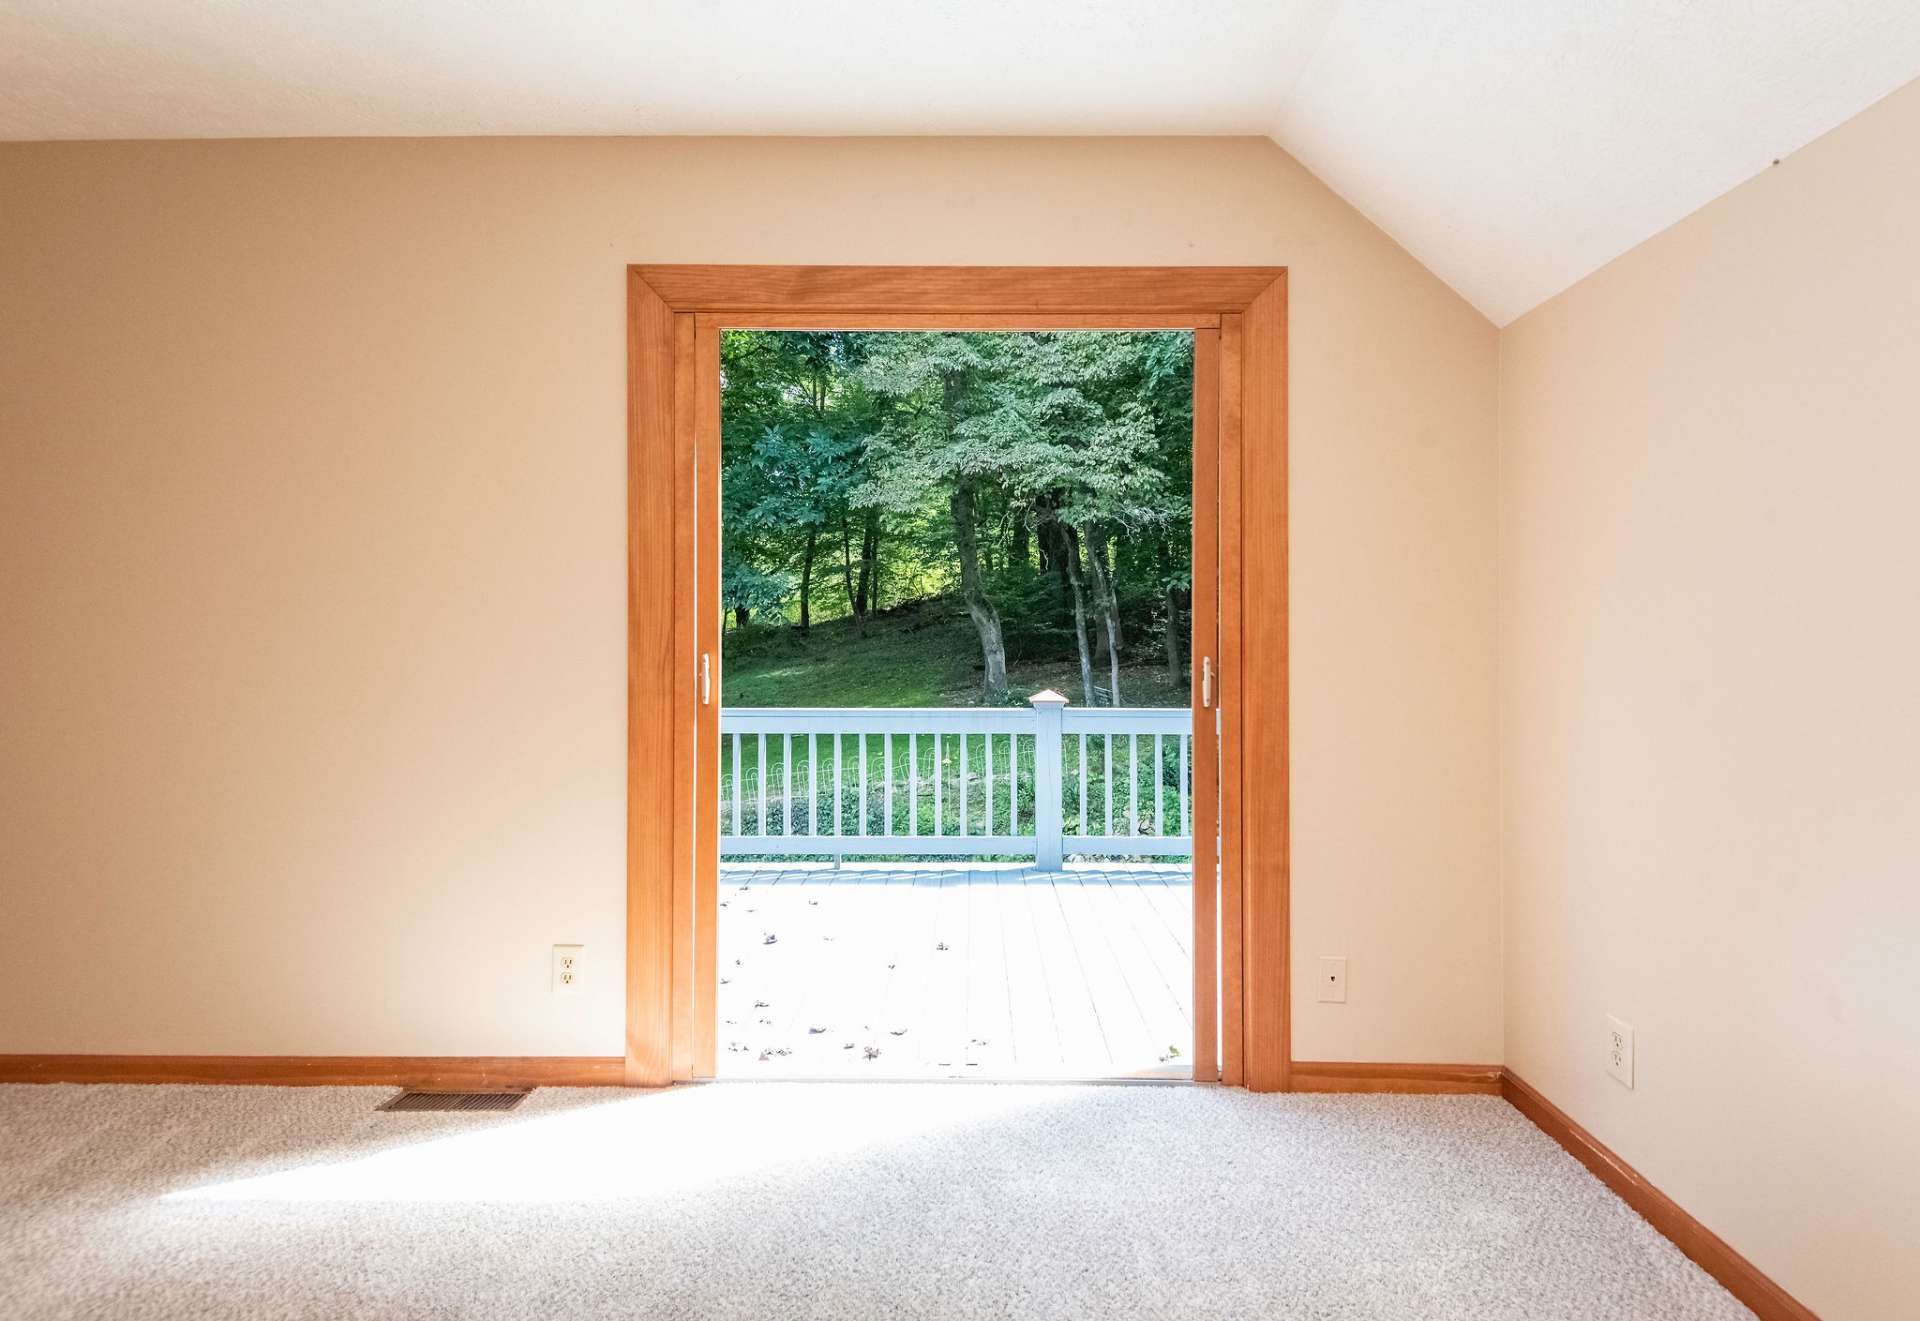 Both french doors open to the deck to let in the fresh mountain air.